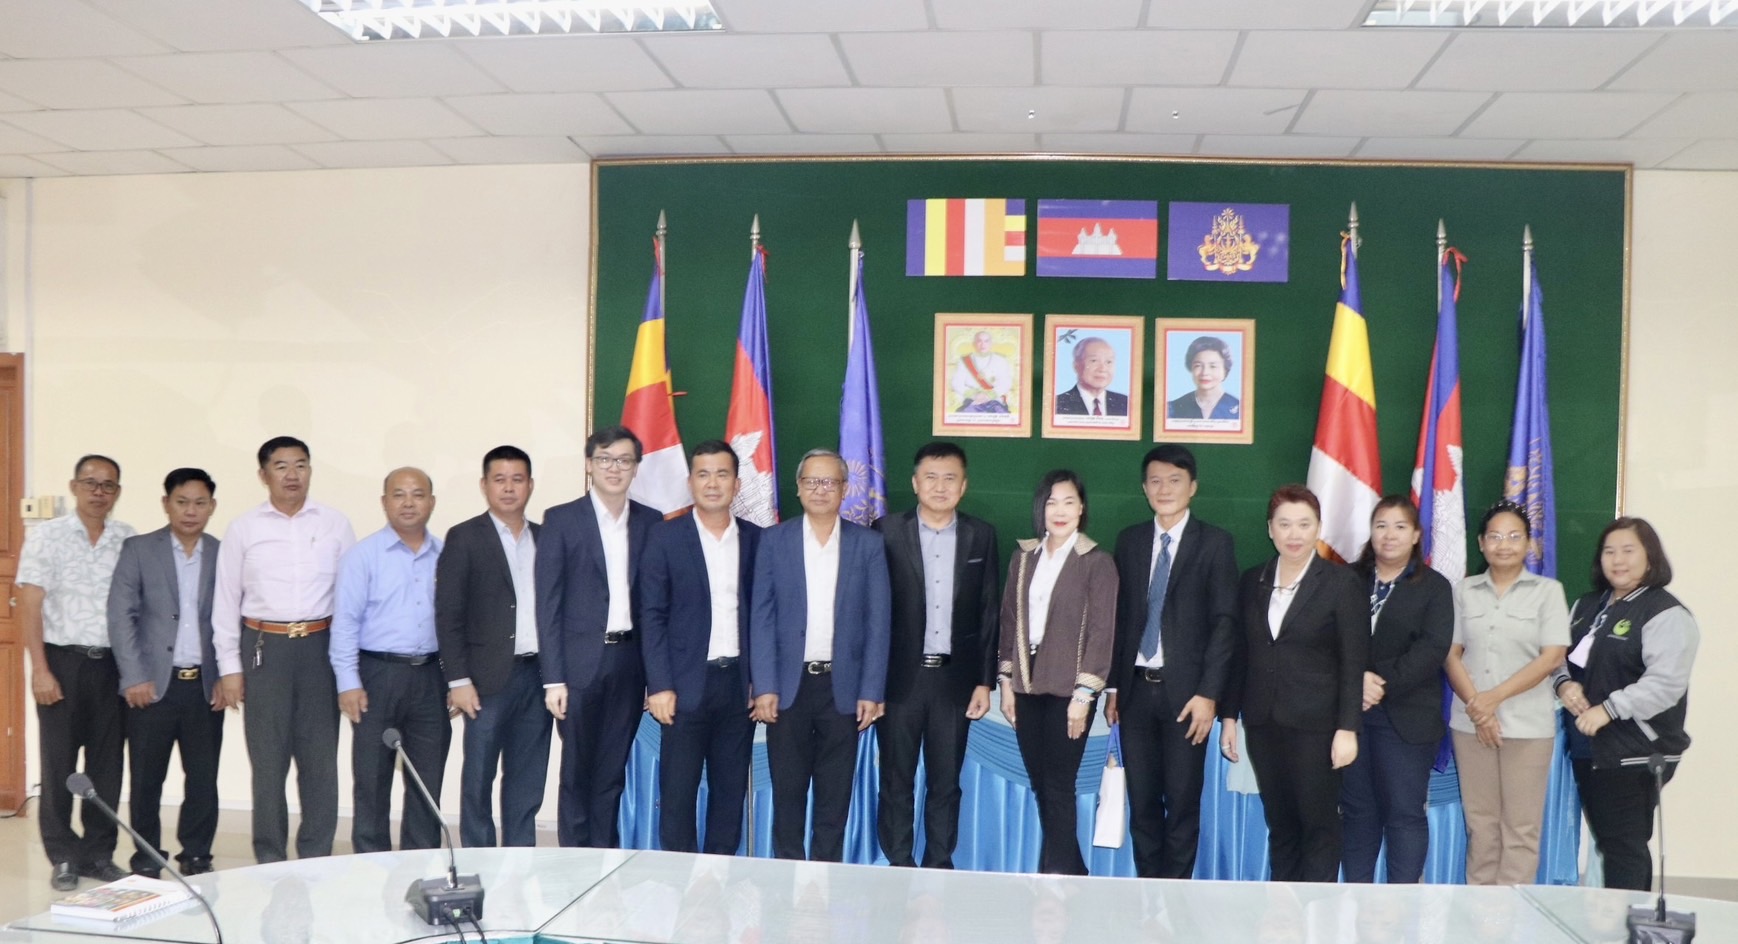 OIE Joins the Food Institute to visit Cambodia to Strengthen the Food Security Network in the Lancang-Mekong Subregion